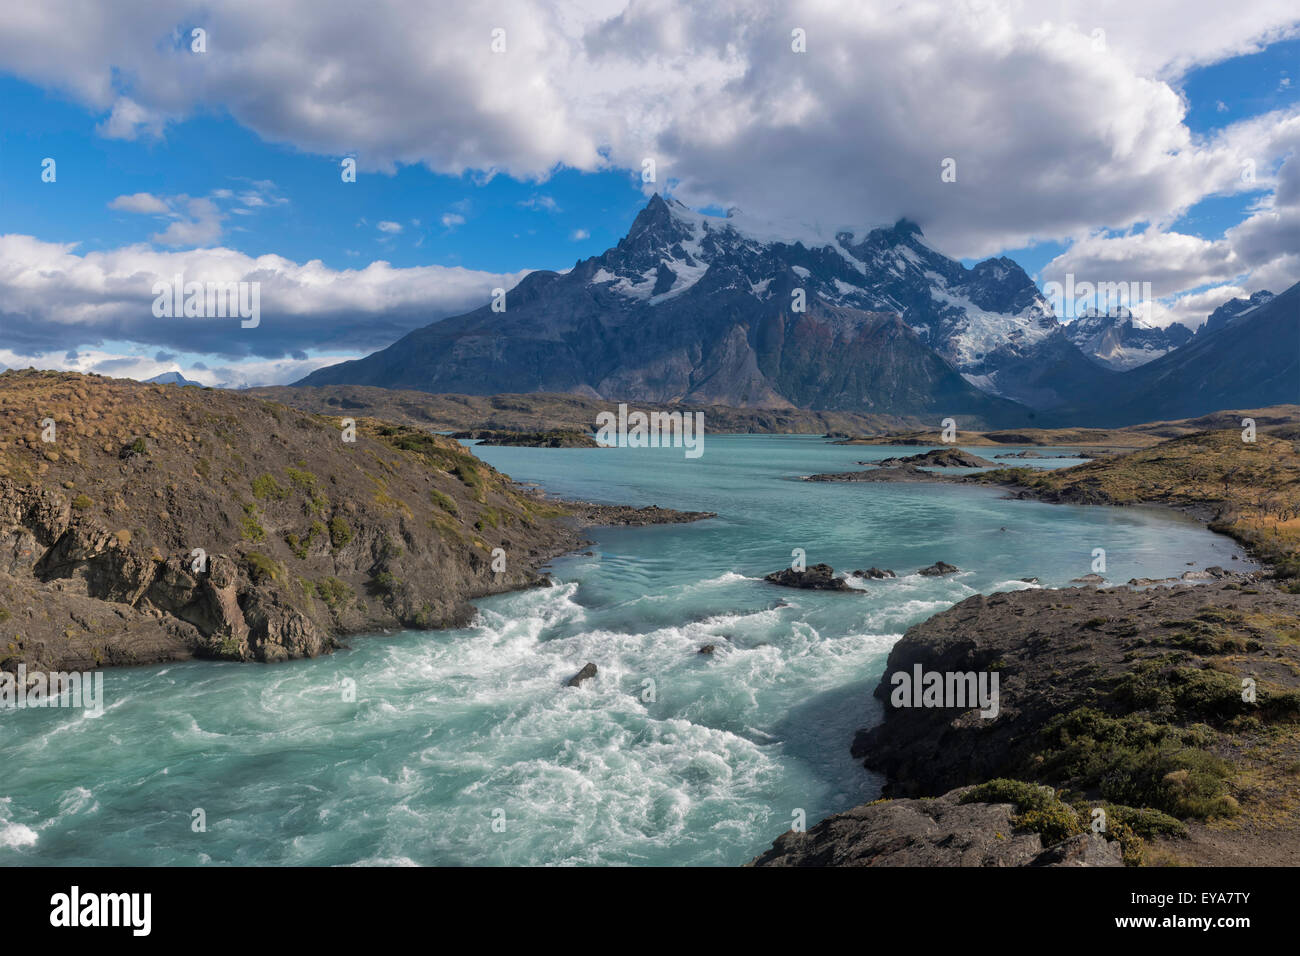 Stream, Torres del Paine National Park, Chilean Patagonia, Chile Stock Photo